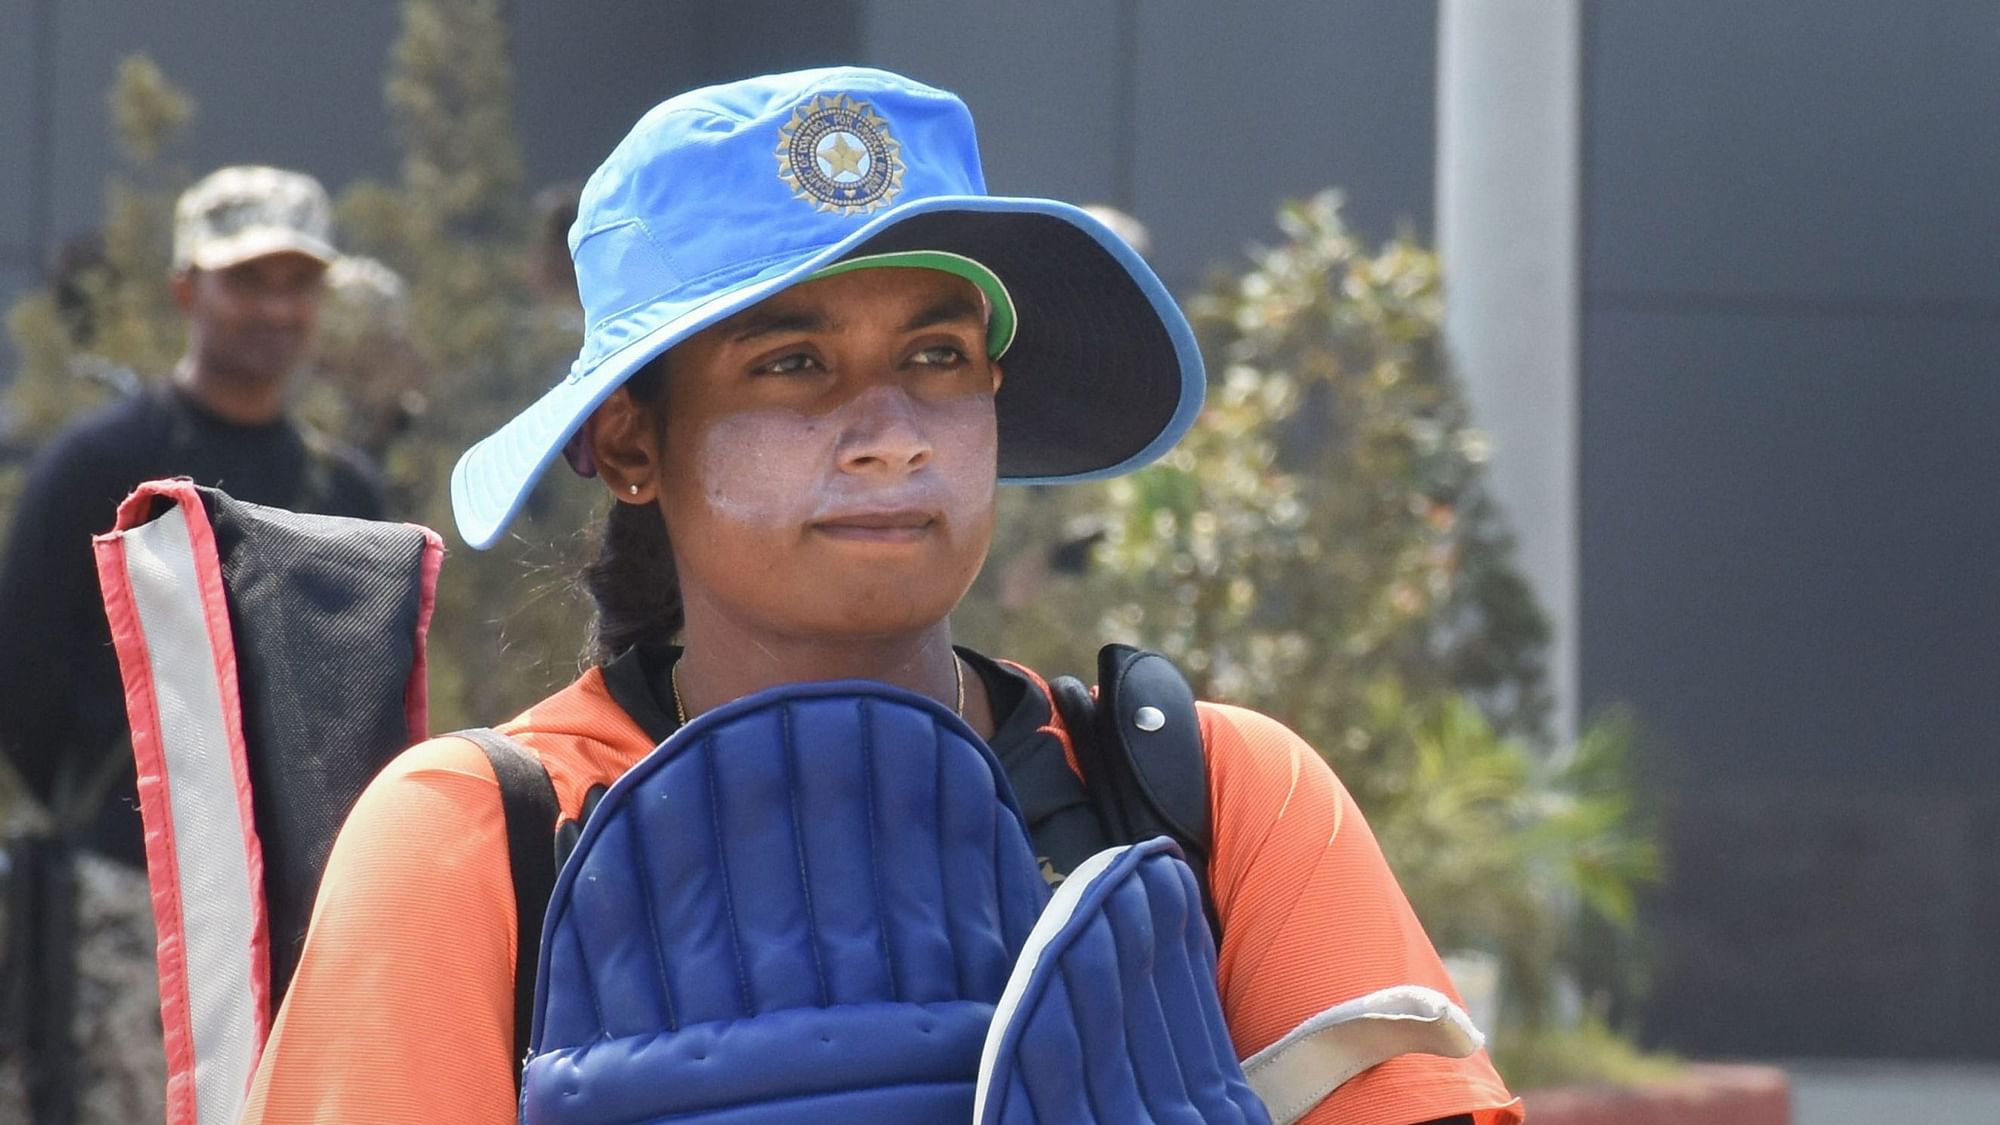 Mithali Raj has said India are favourites to win the ICC World Cup 2019.